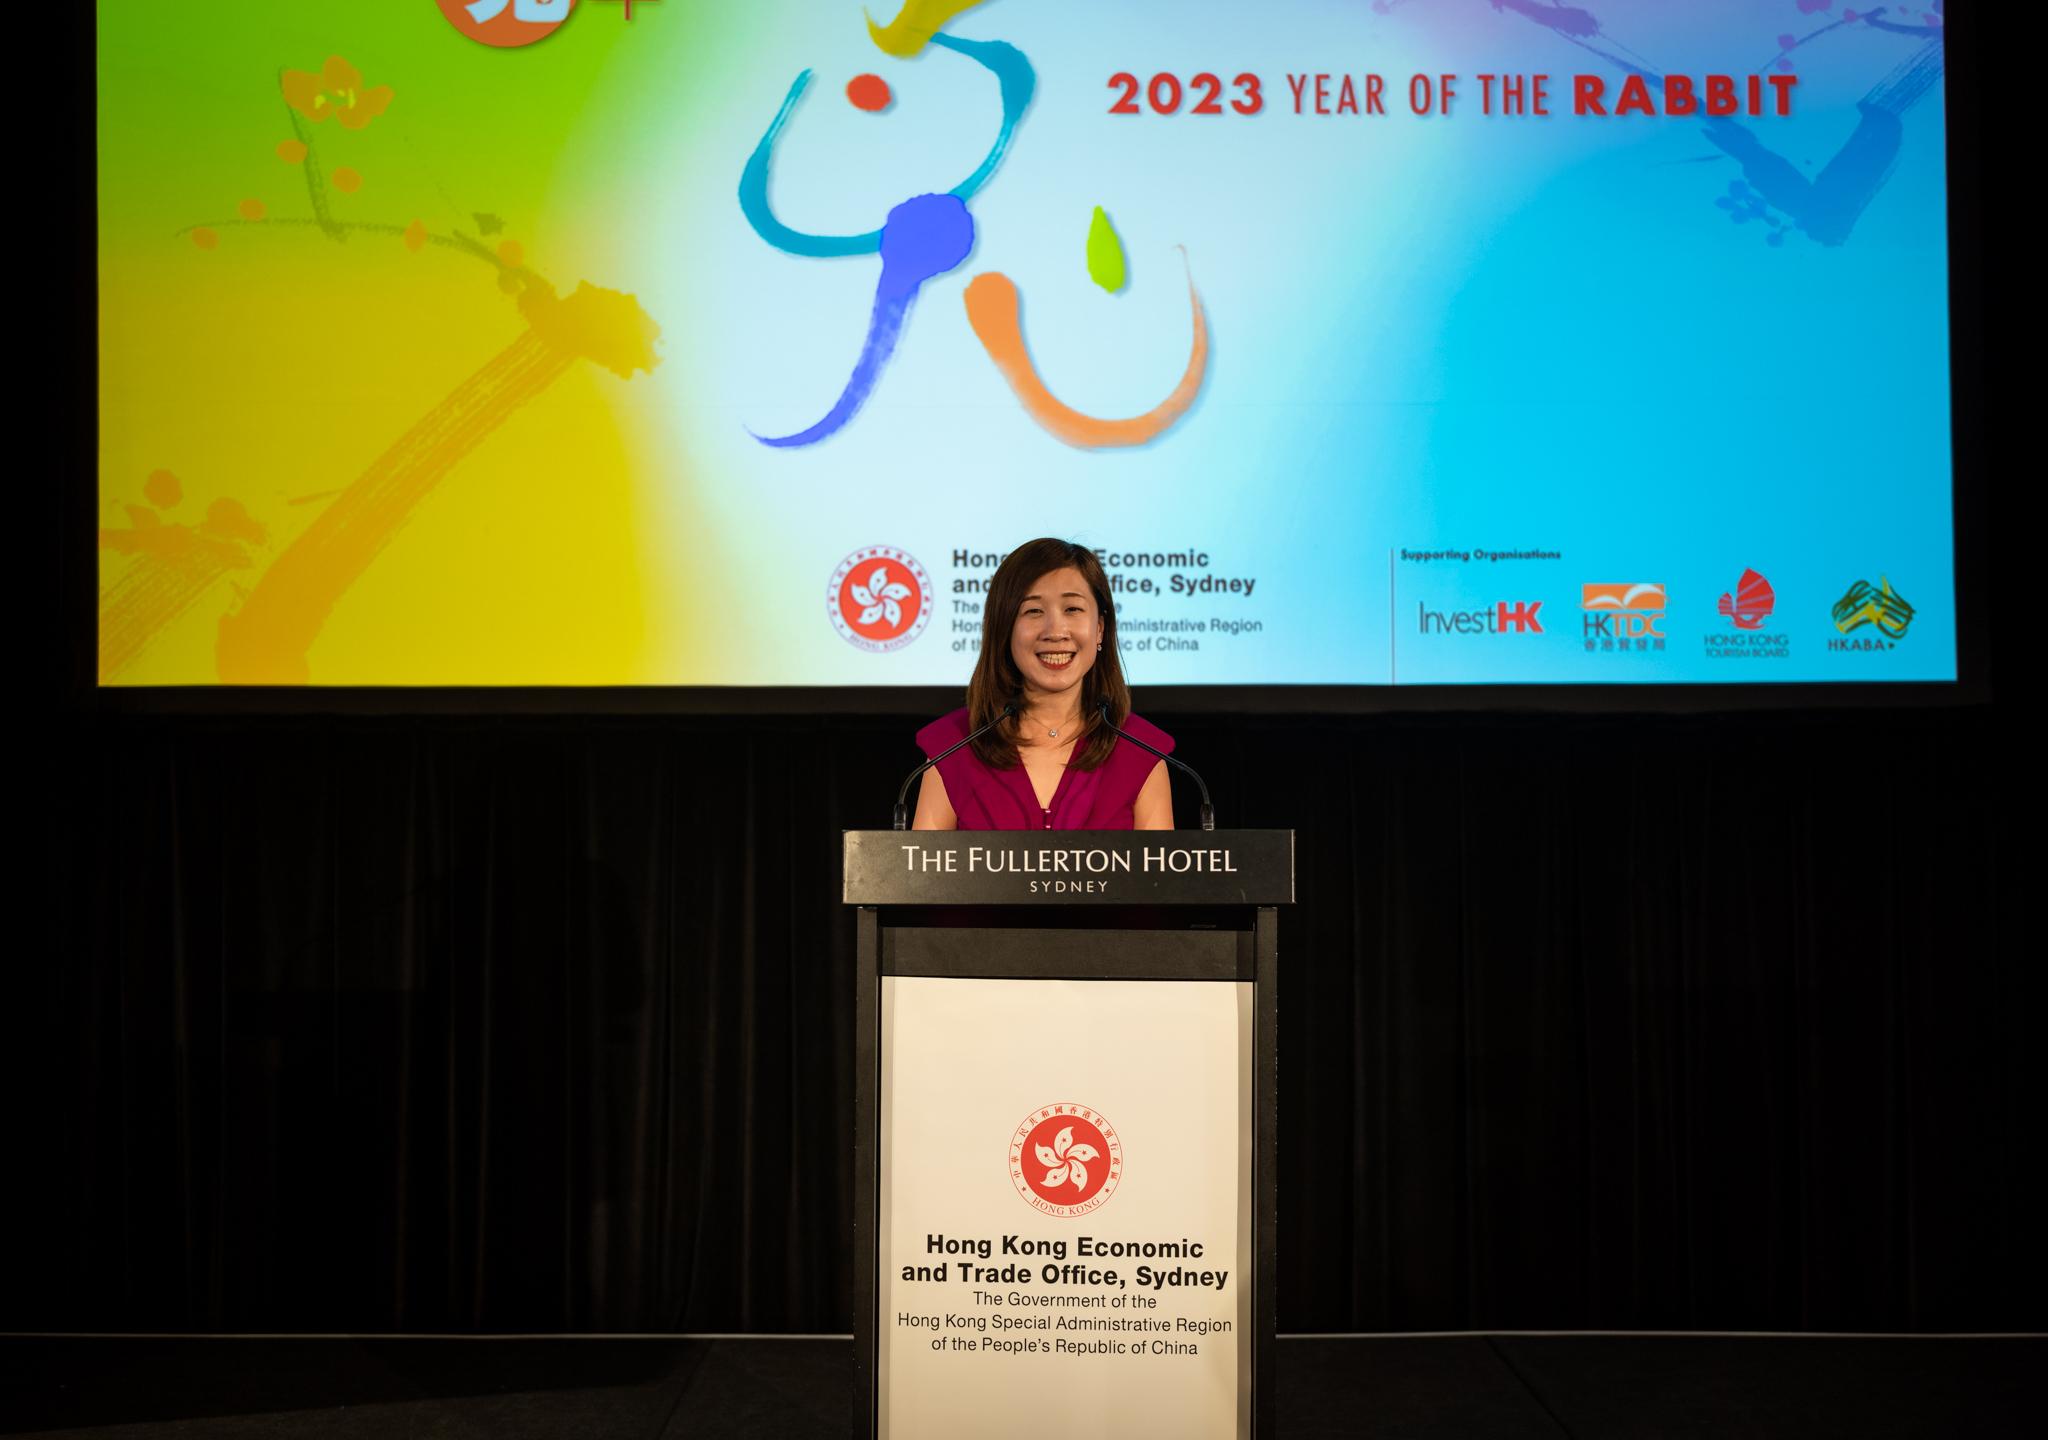 The Director of the Hong Kong Economic and Trade Office, Sydney, Miss Trista Lim, delivers a welcoming speech at the reception held in Sydney, Australia, today (February 7) to celebrate the Year of the Rabbit.